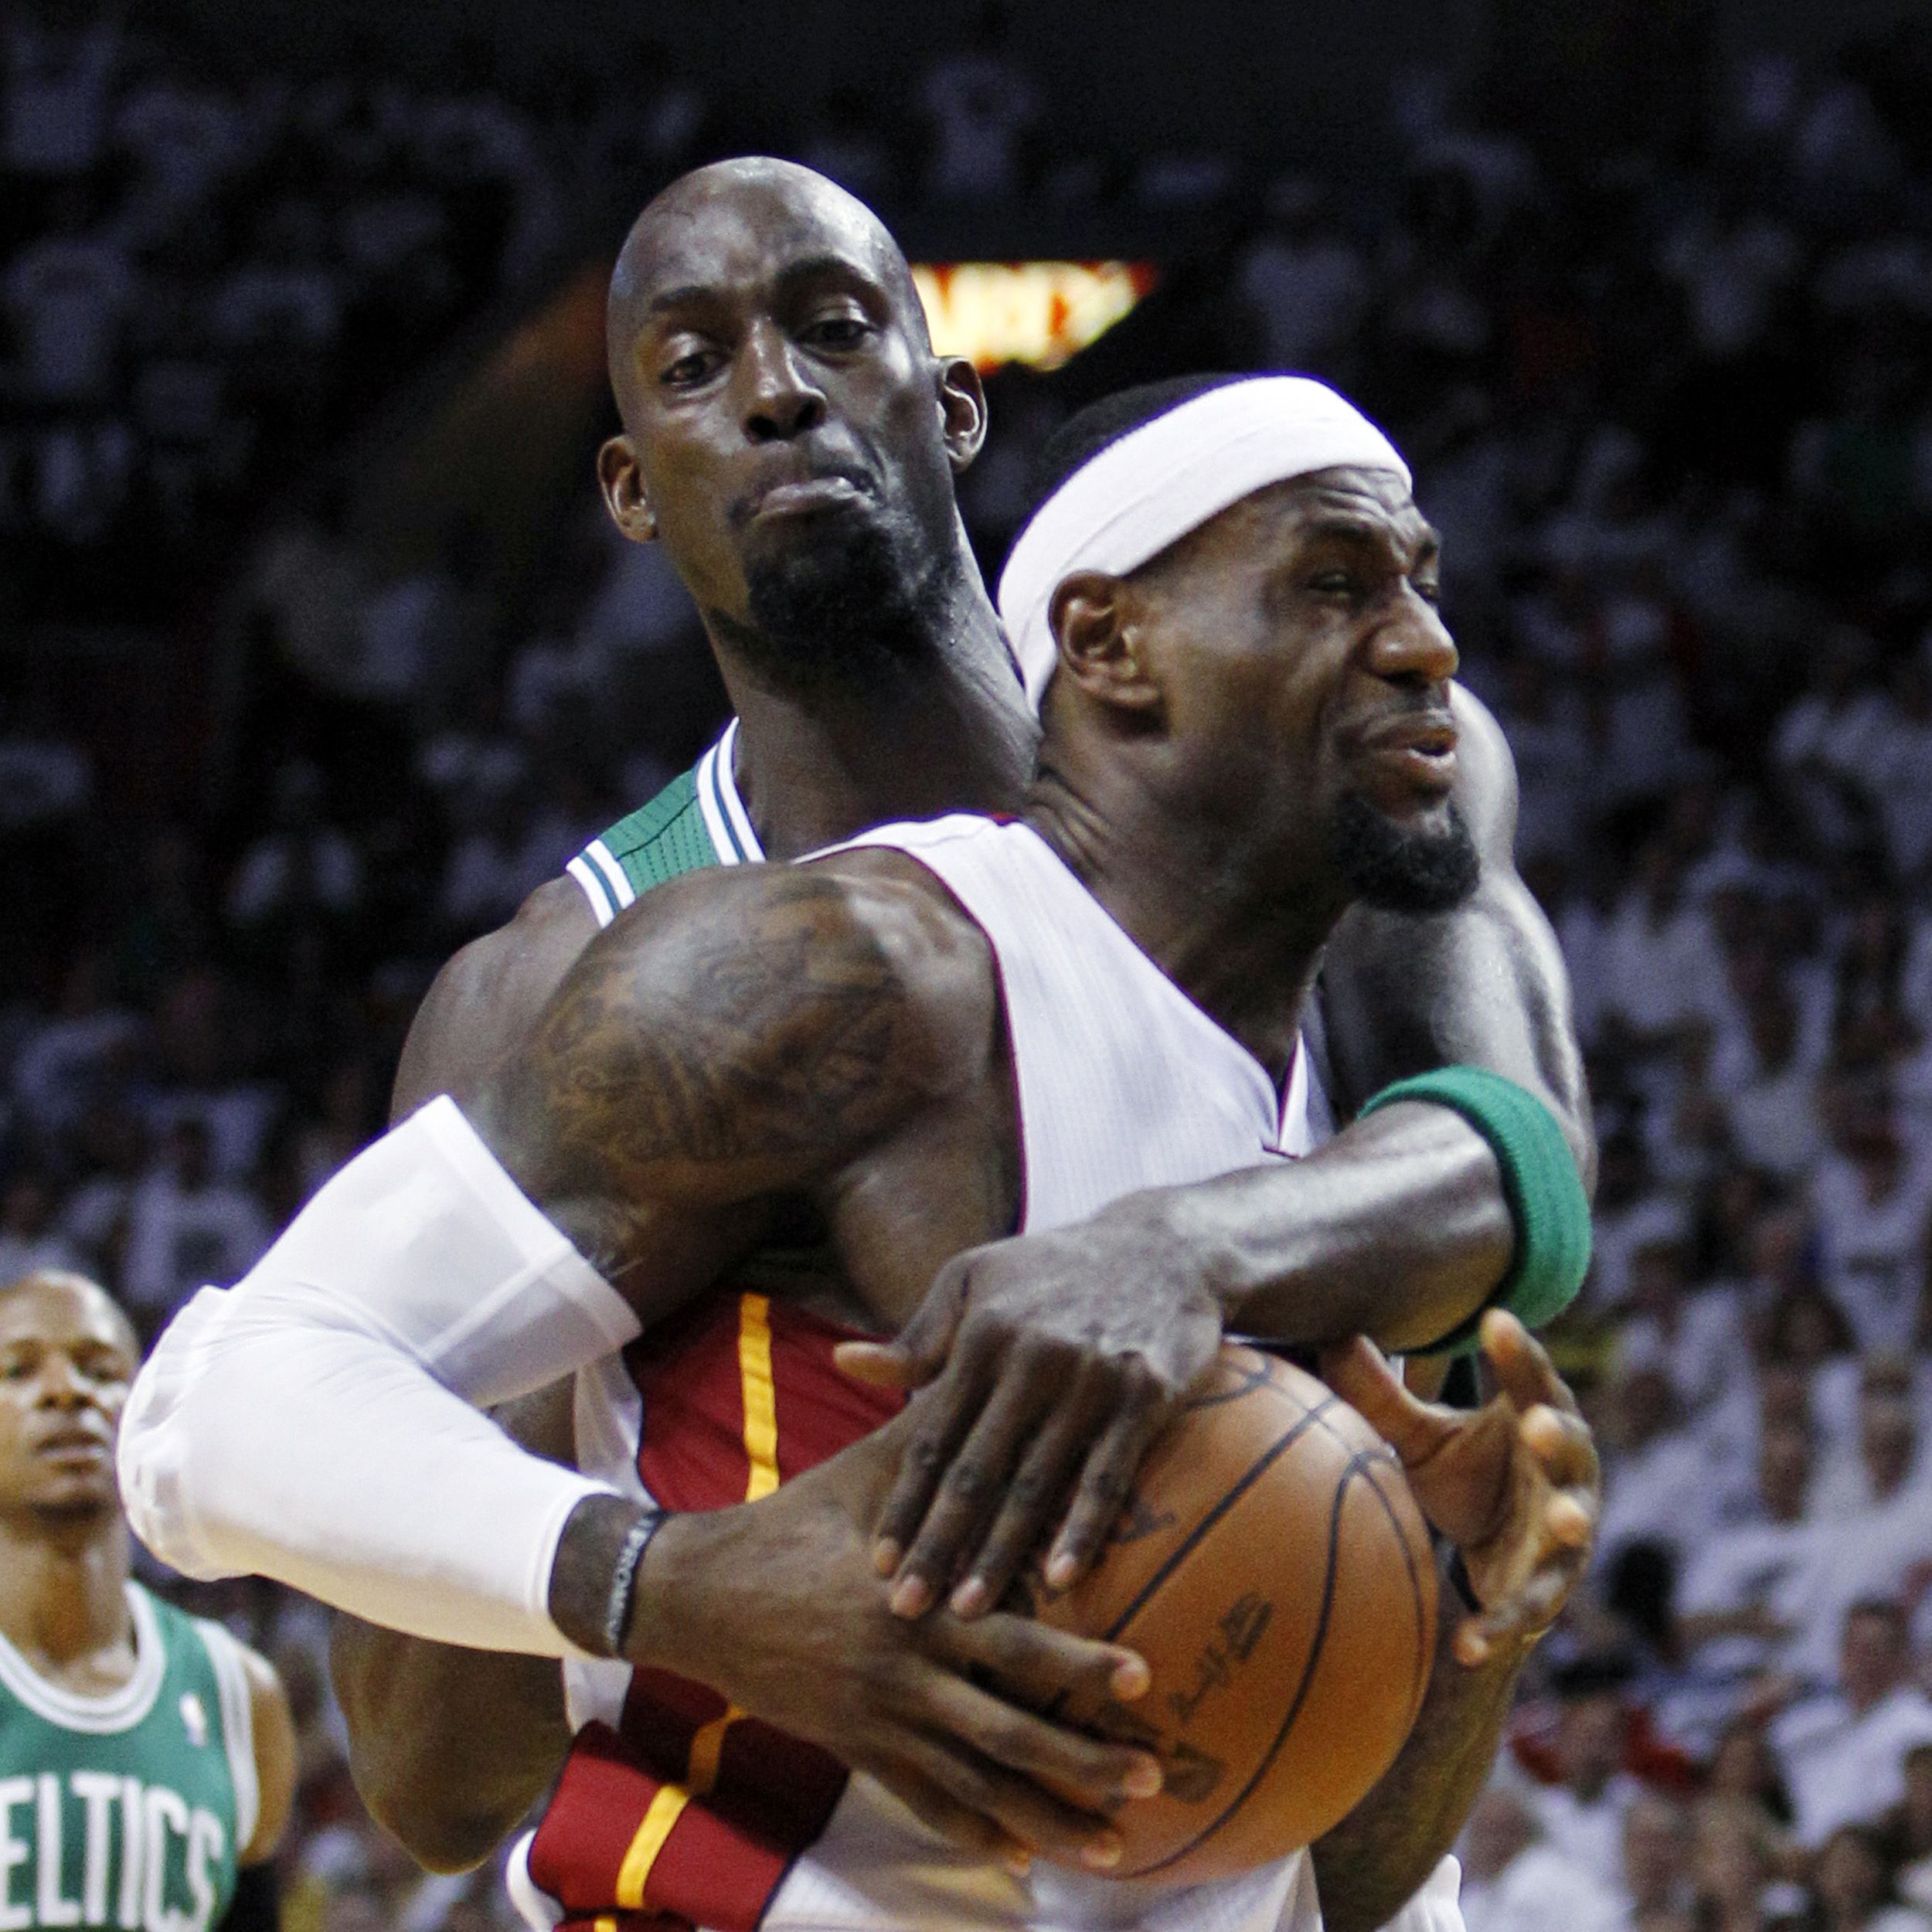 To the Finals: Heat top Celtics 101-88 in Game 7